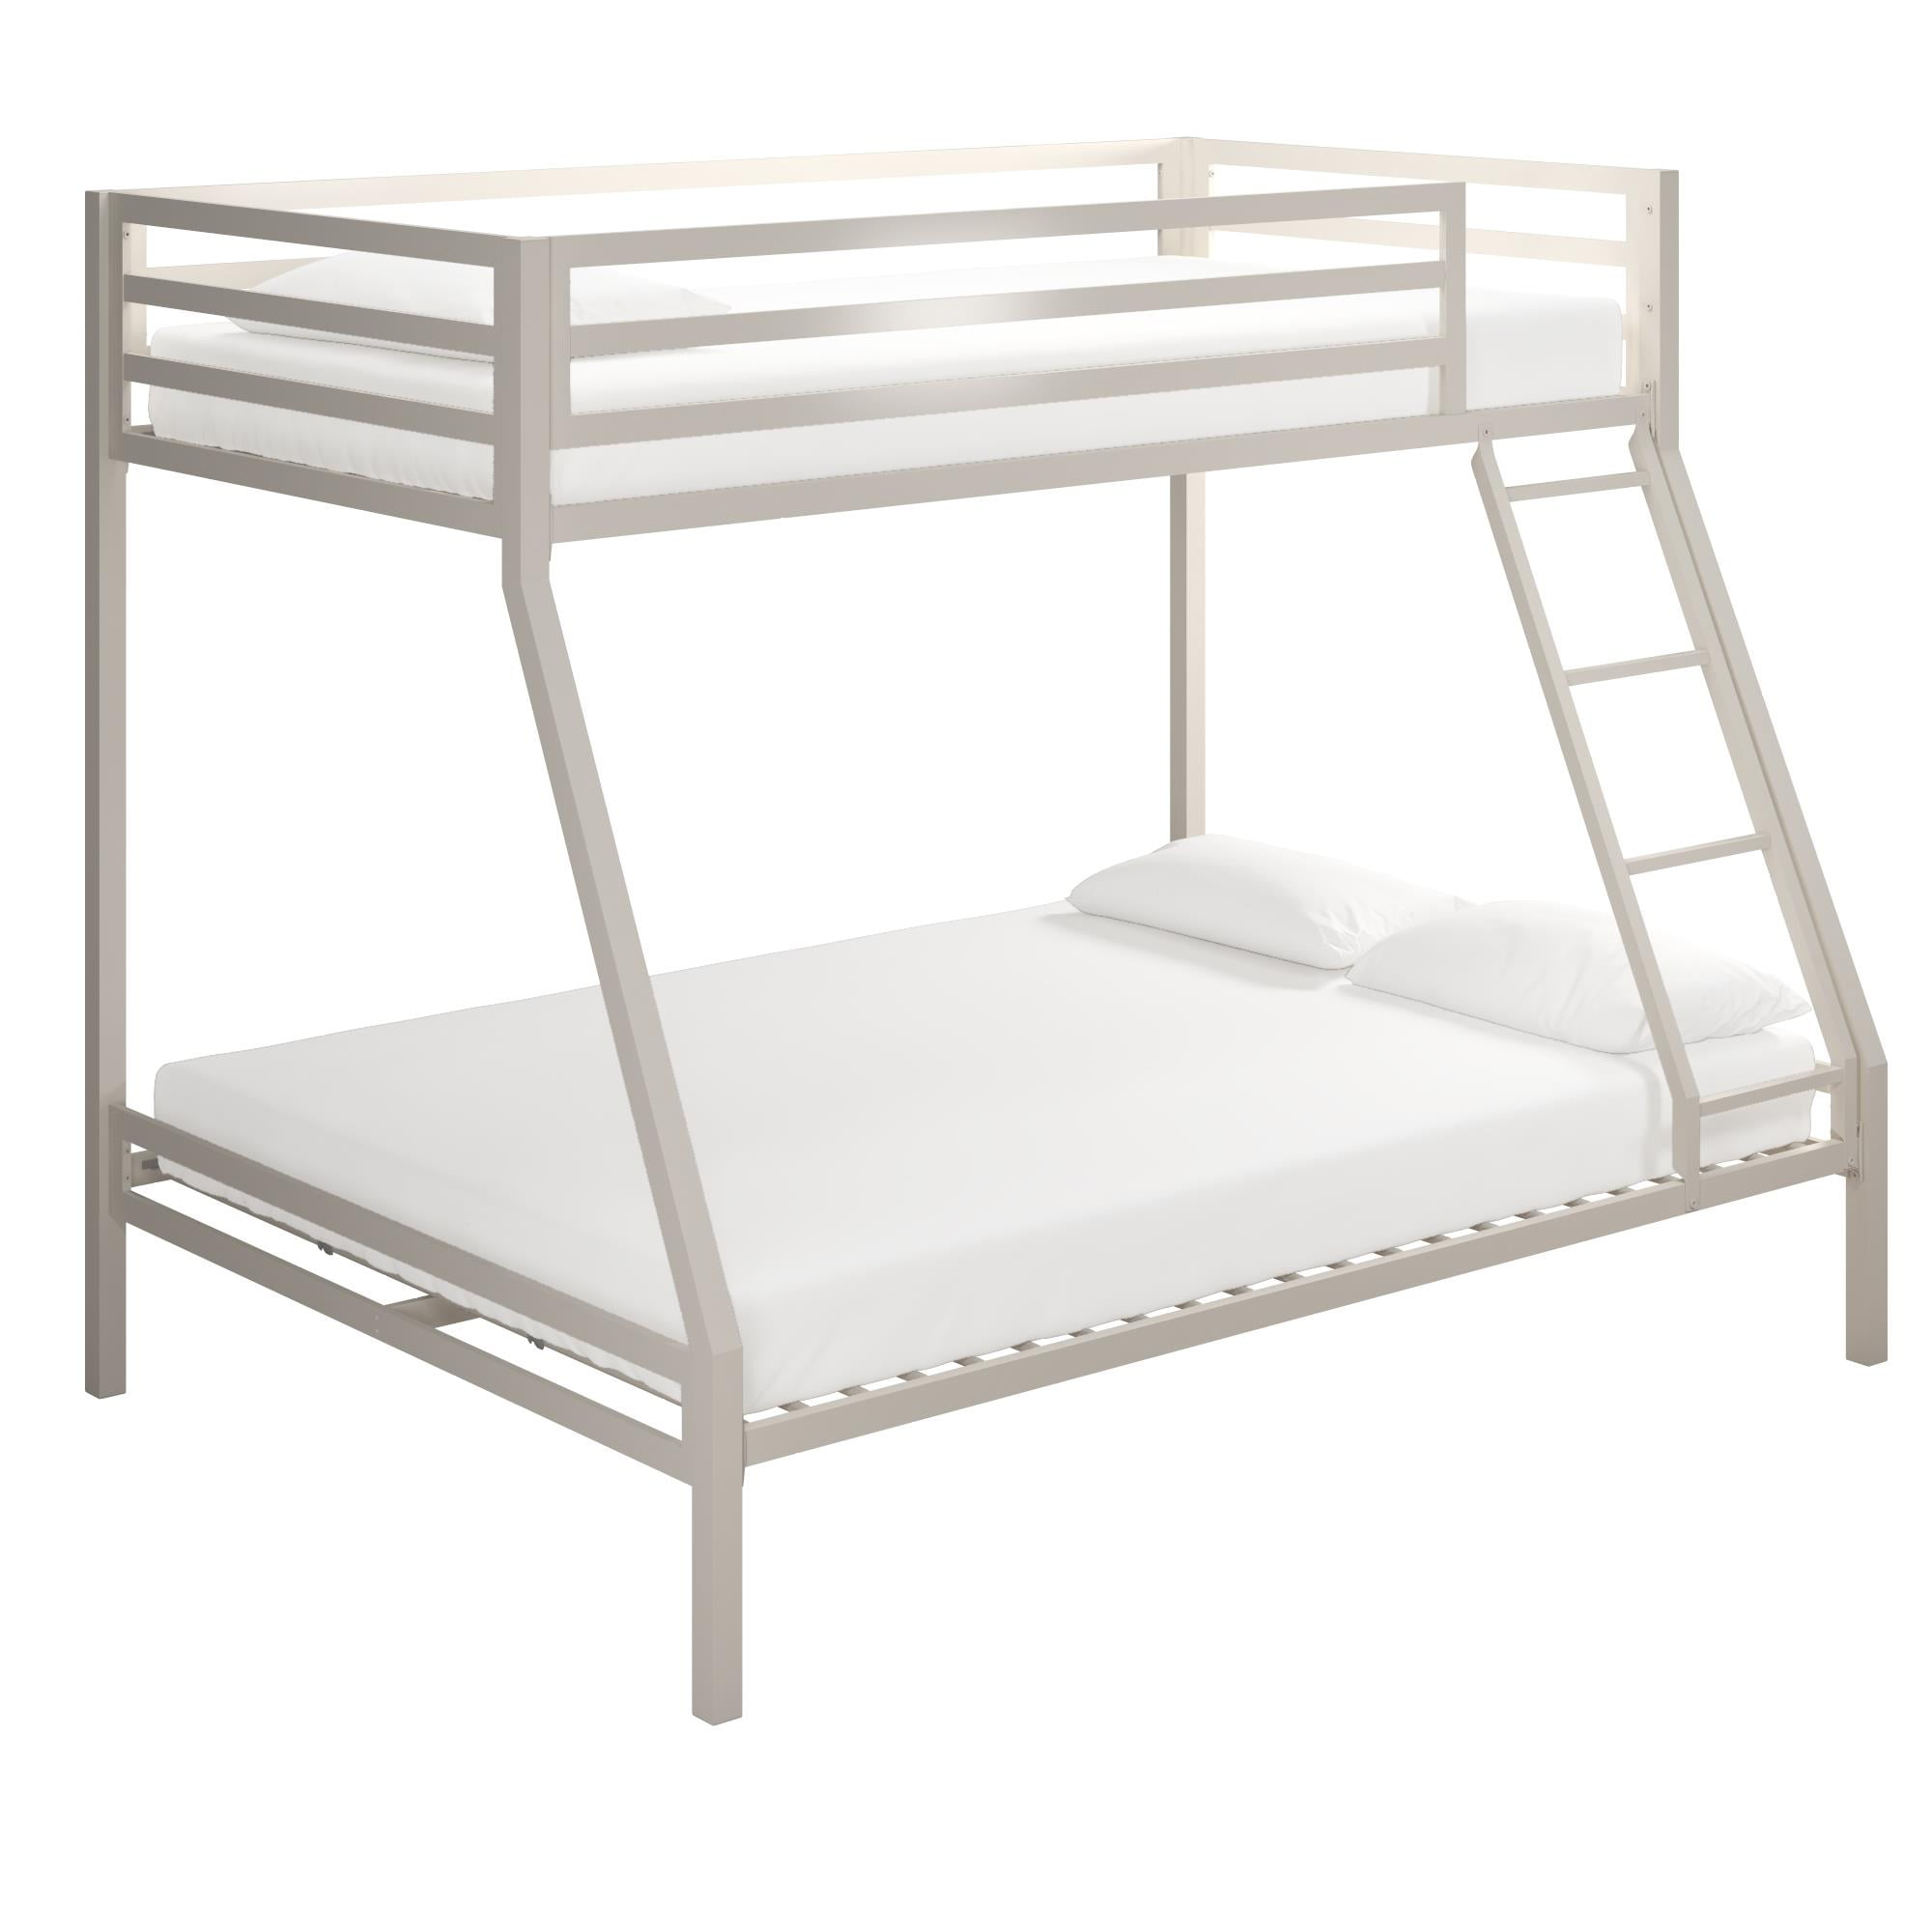 Mainstays Premium Twin Over Full Bunk Bed, Mainstays Premium Twin Over Full Bunk Bed Blueprint